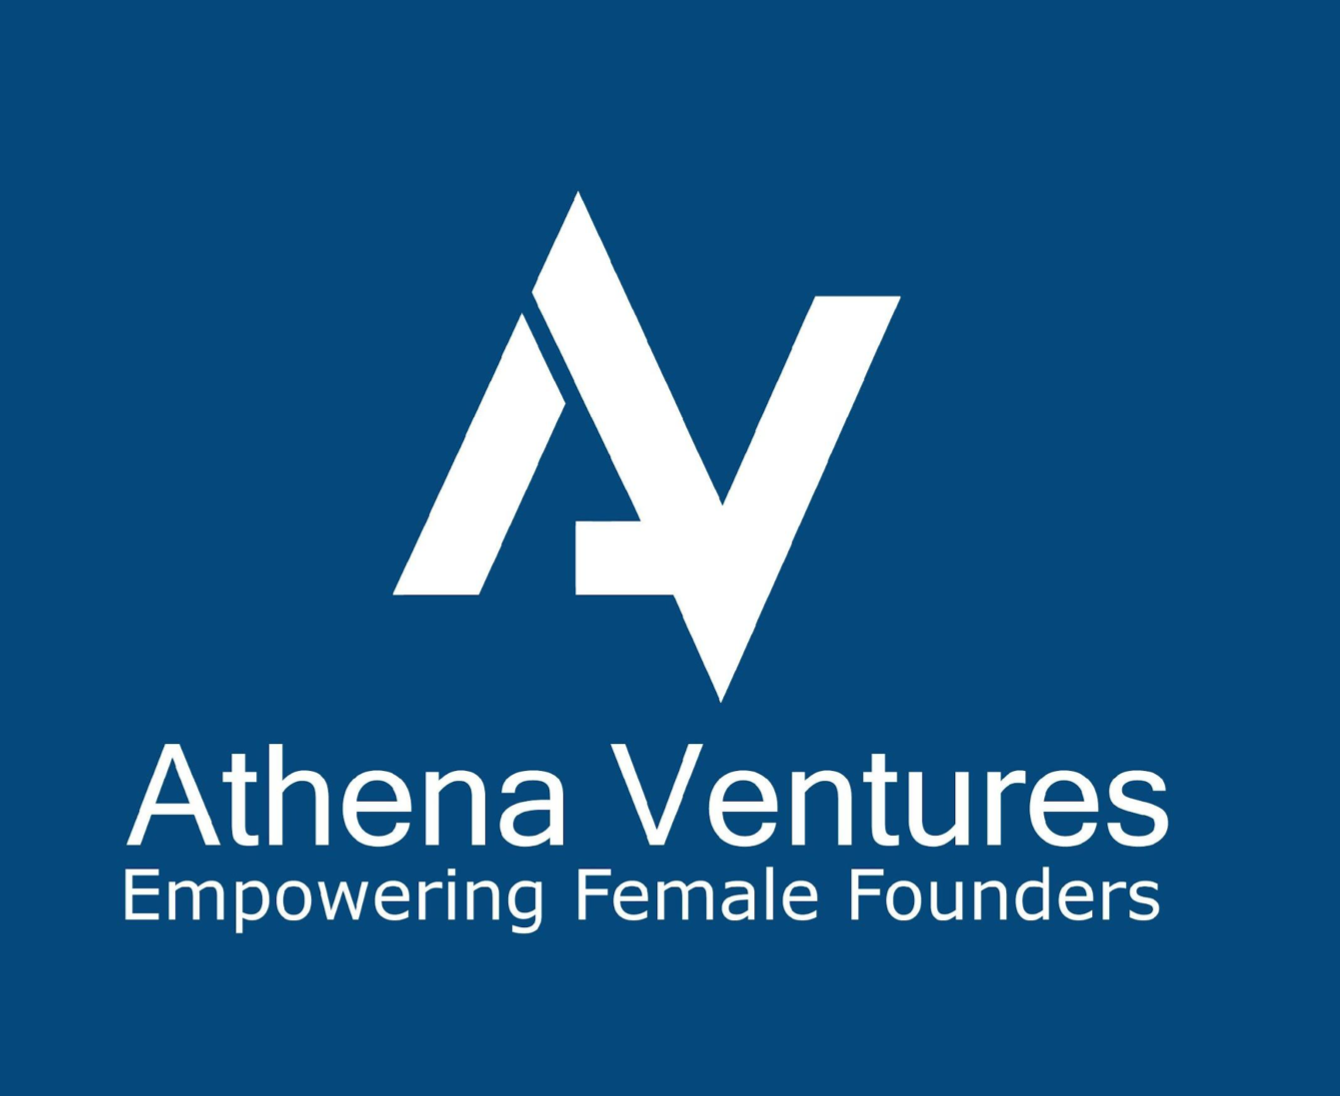 An image of the Athena Ventures logo, with a blue background